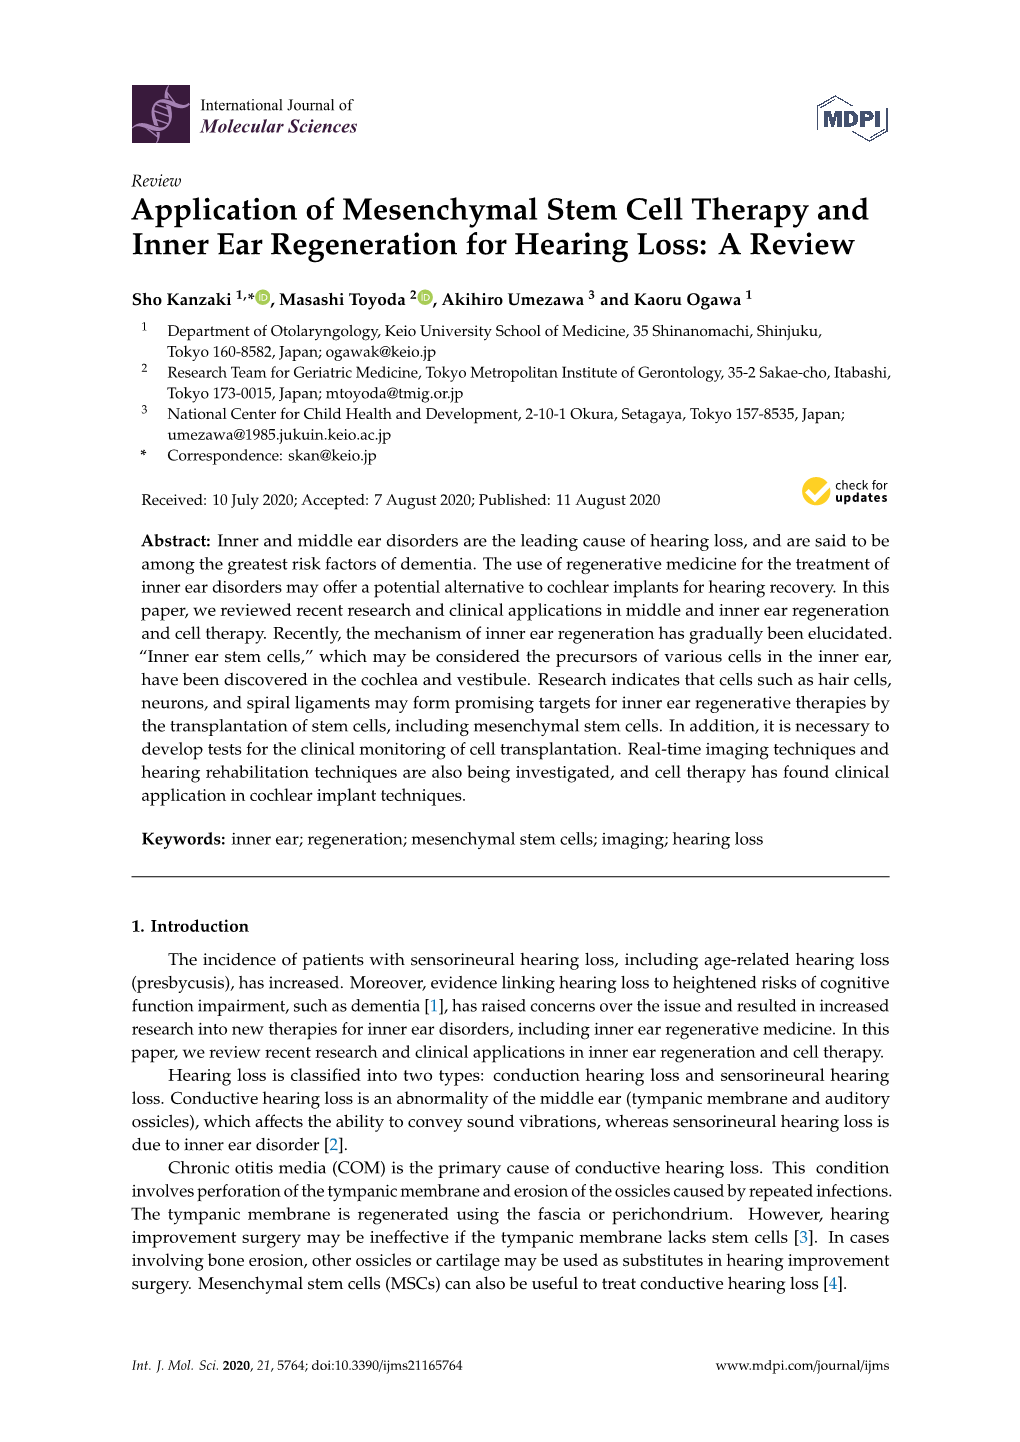 Application of Mesenchymal Stem Cell Therapy and Inner Ear Regeneration for Hearing Loss: a Review